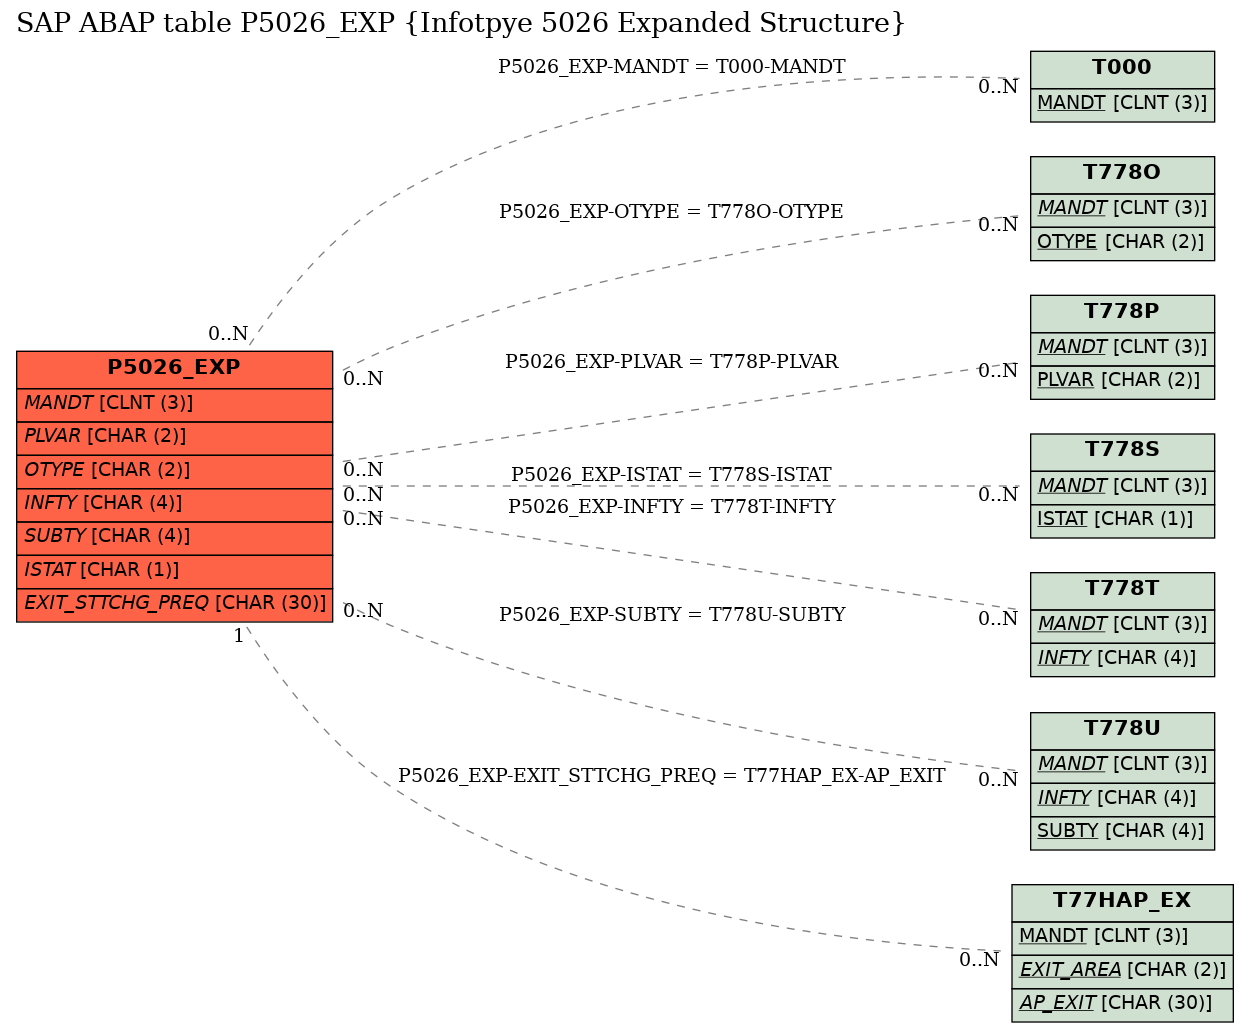 E-R Diagram for table P5026_EXP (Infotpye 5026 Expanded Structure)